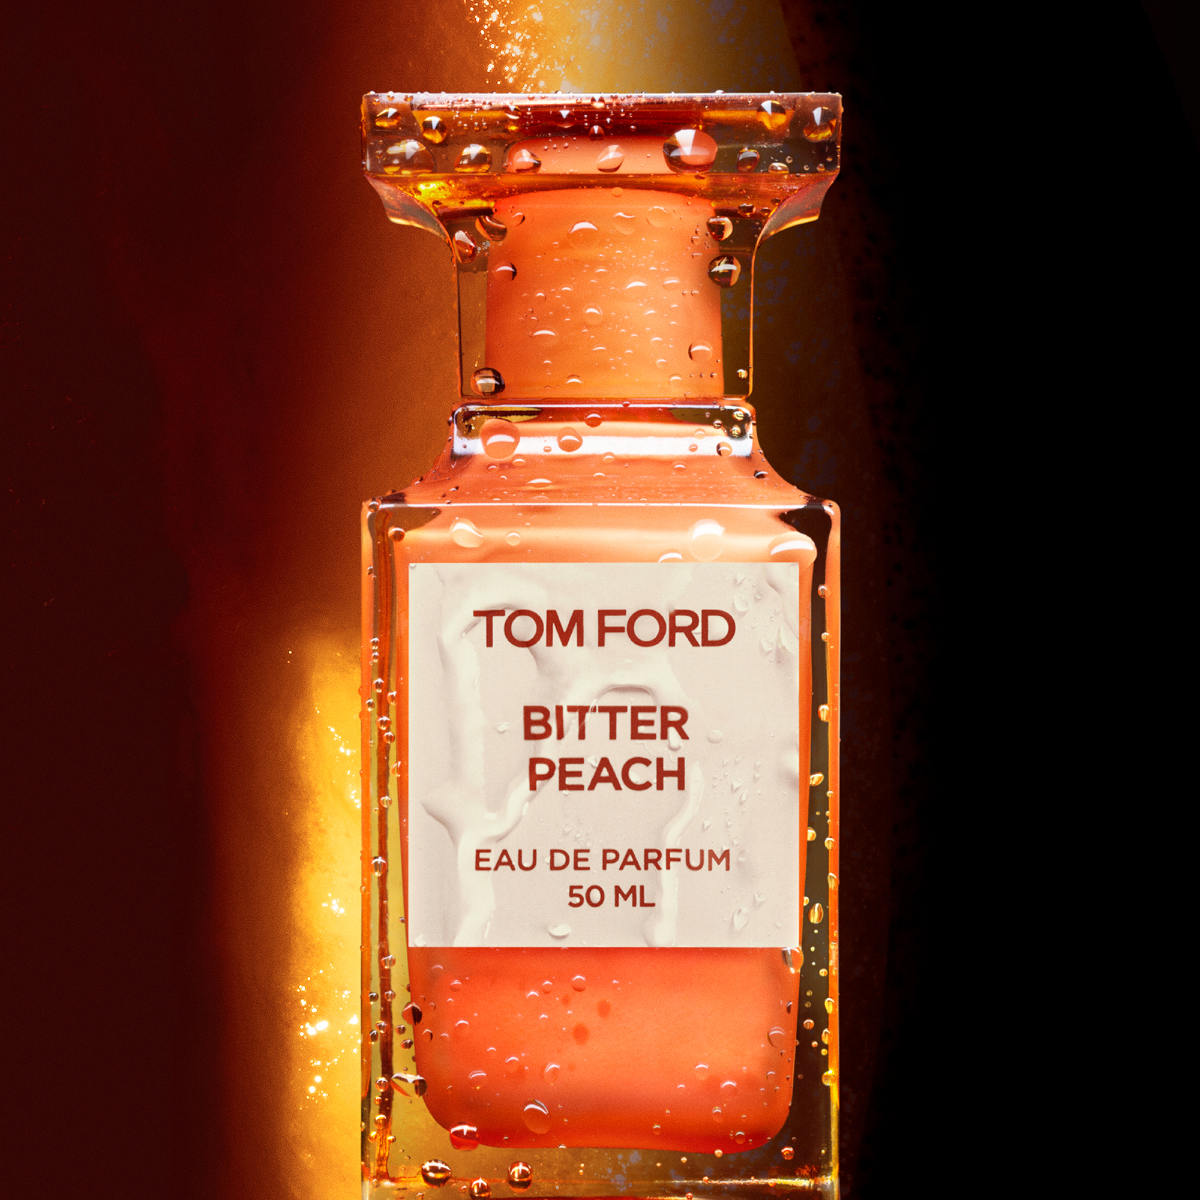 Tom Ford Presents new Private Blend Fragrance: Bitter Peach